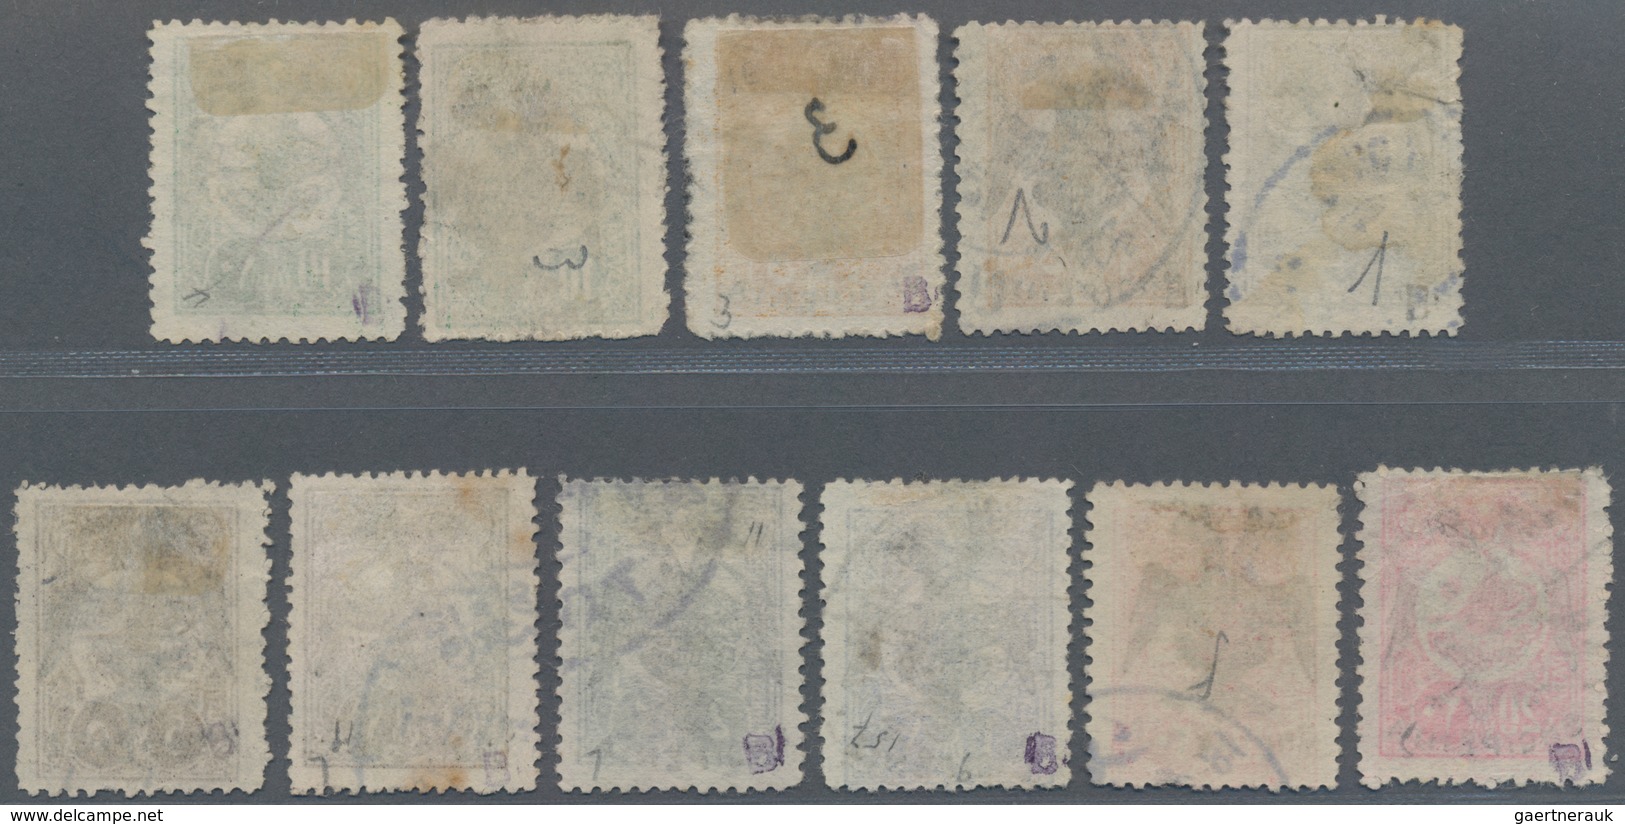 Albanien: 1913, Turkish Stamps Handstamped With Double-headed Eagle And 'SHQIPËNIA' 11 Stamps Incl. - Albania